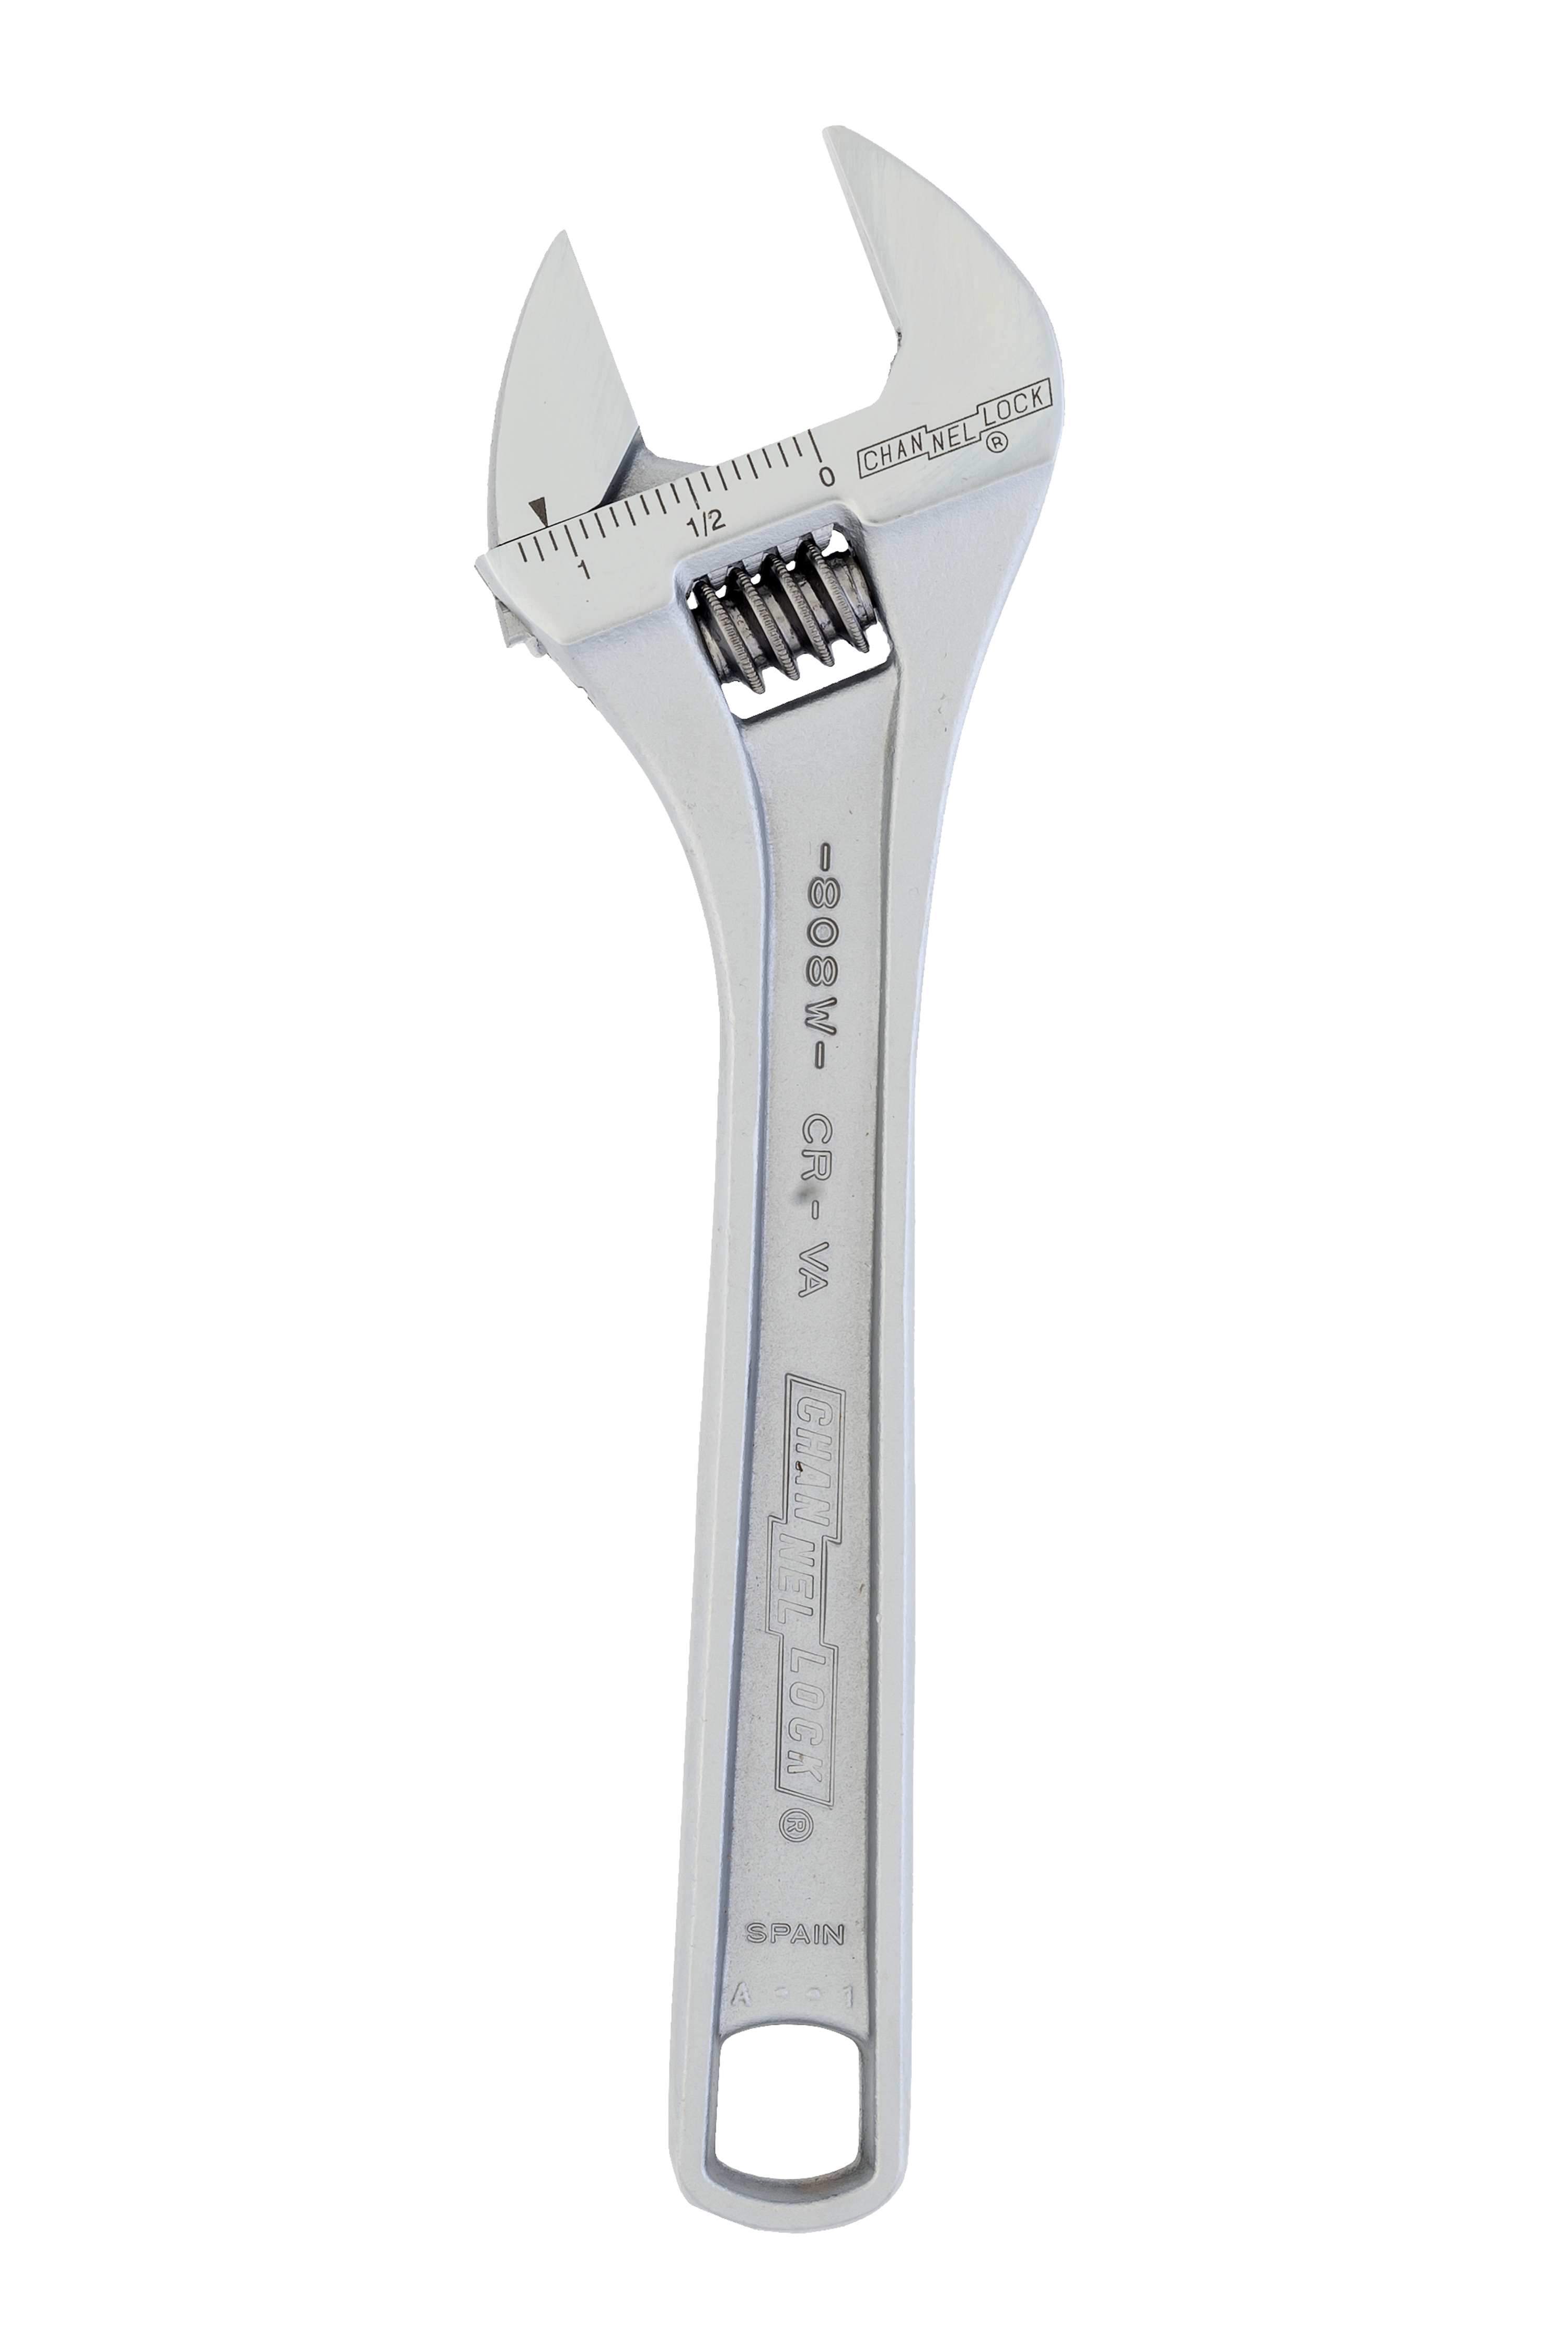 8" Chrome Wide Adjustable Wrench